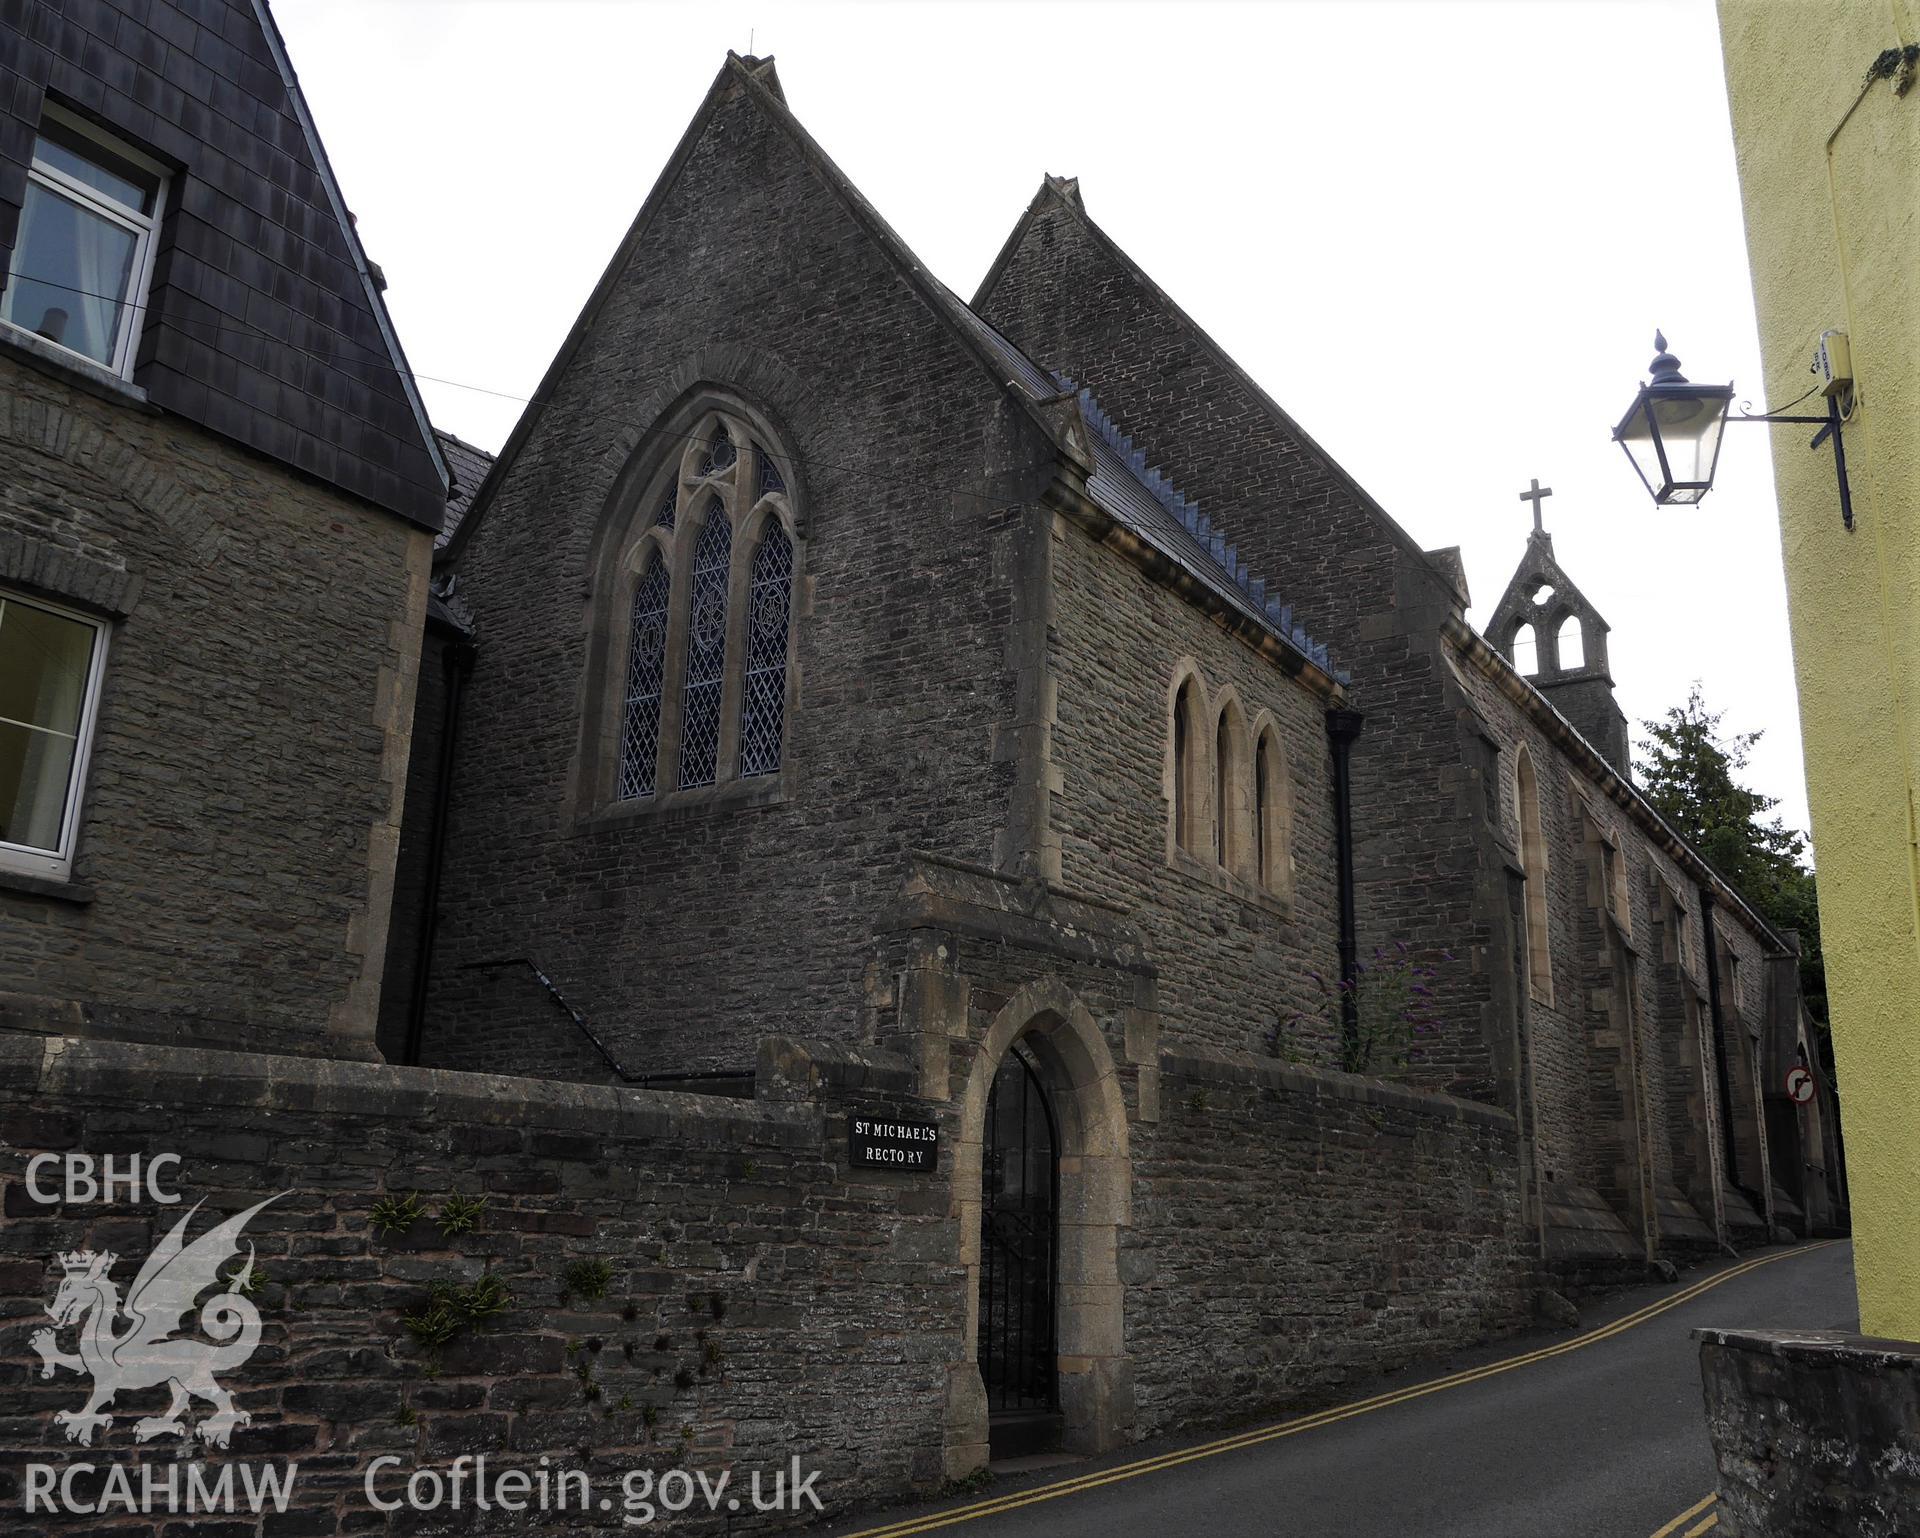 Digital colour photograph showing exterior of St Michael's Catholic church, Brecon.